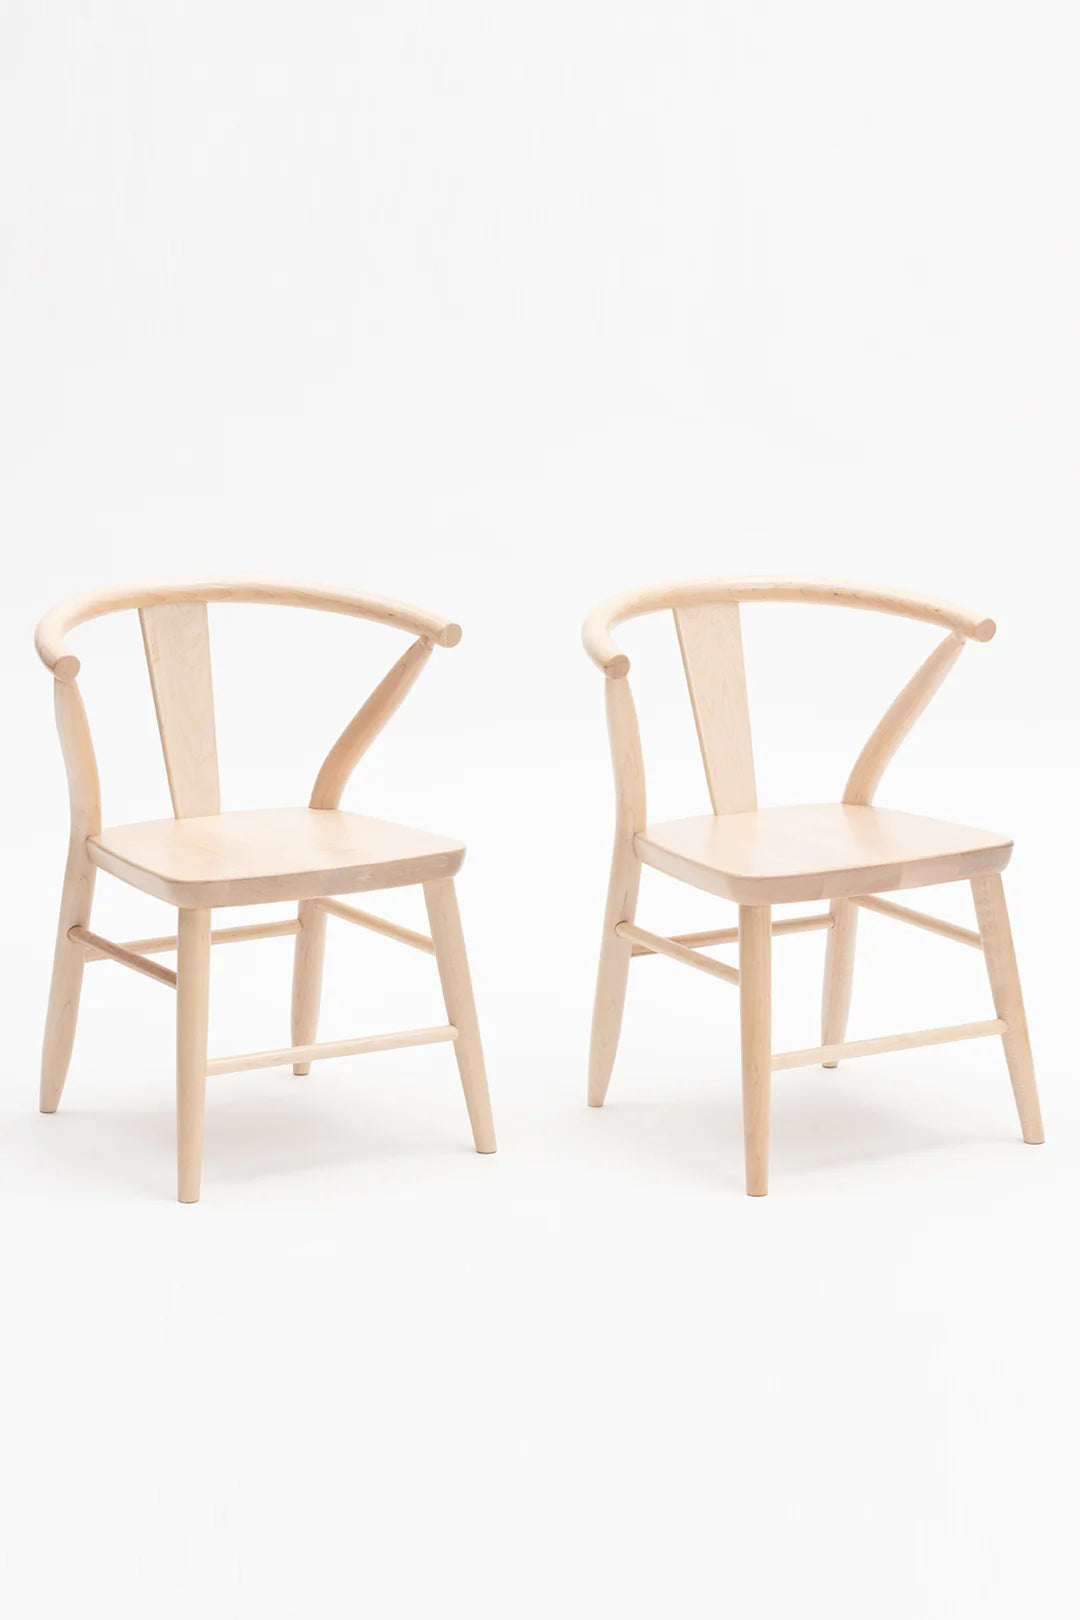 Crescent Chair, Set of 2 - Natural